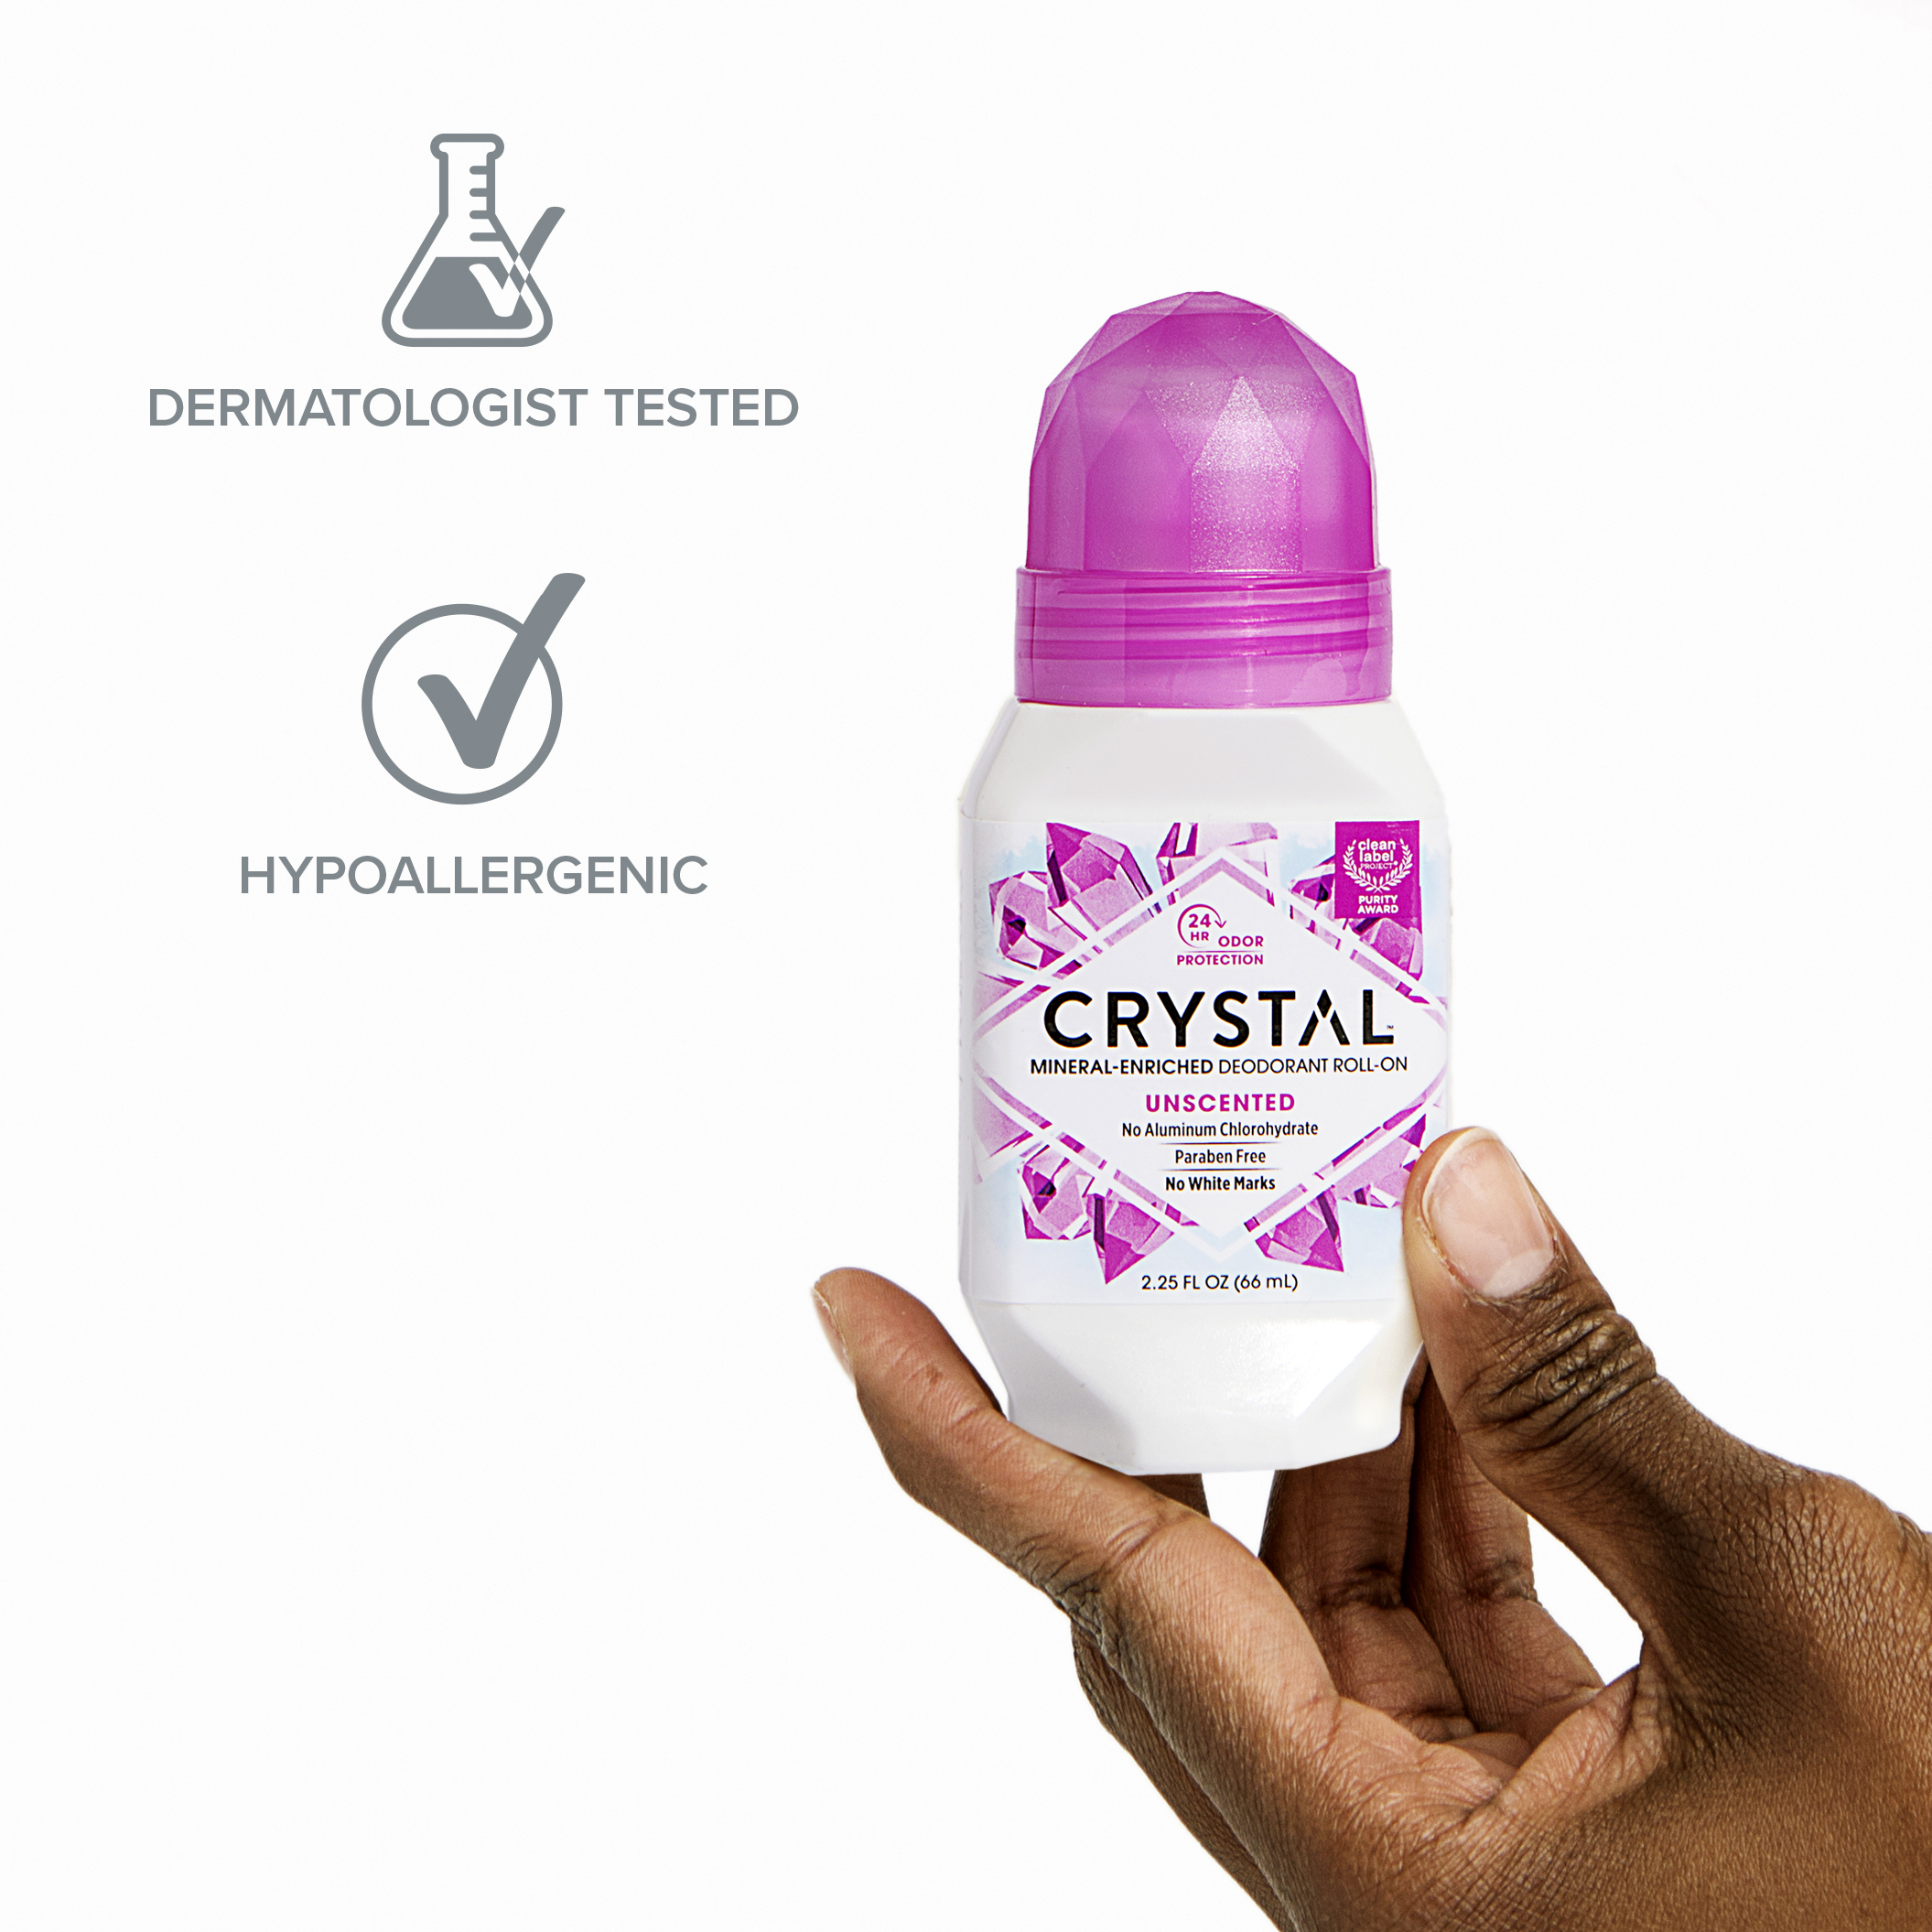 Crystal Natural Protection Roll-On Body Deodorant, 2.25 fl oz - image 5 of 9